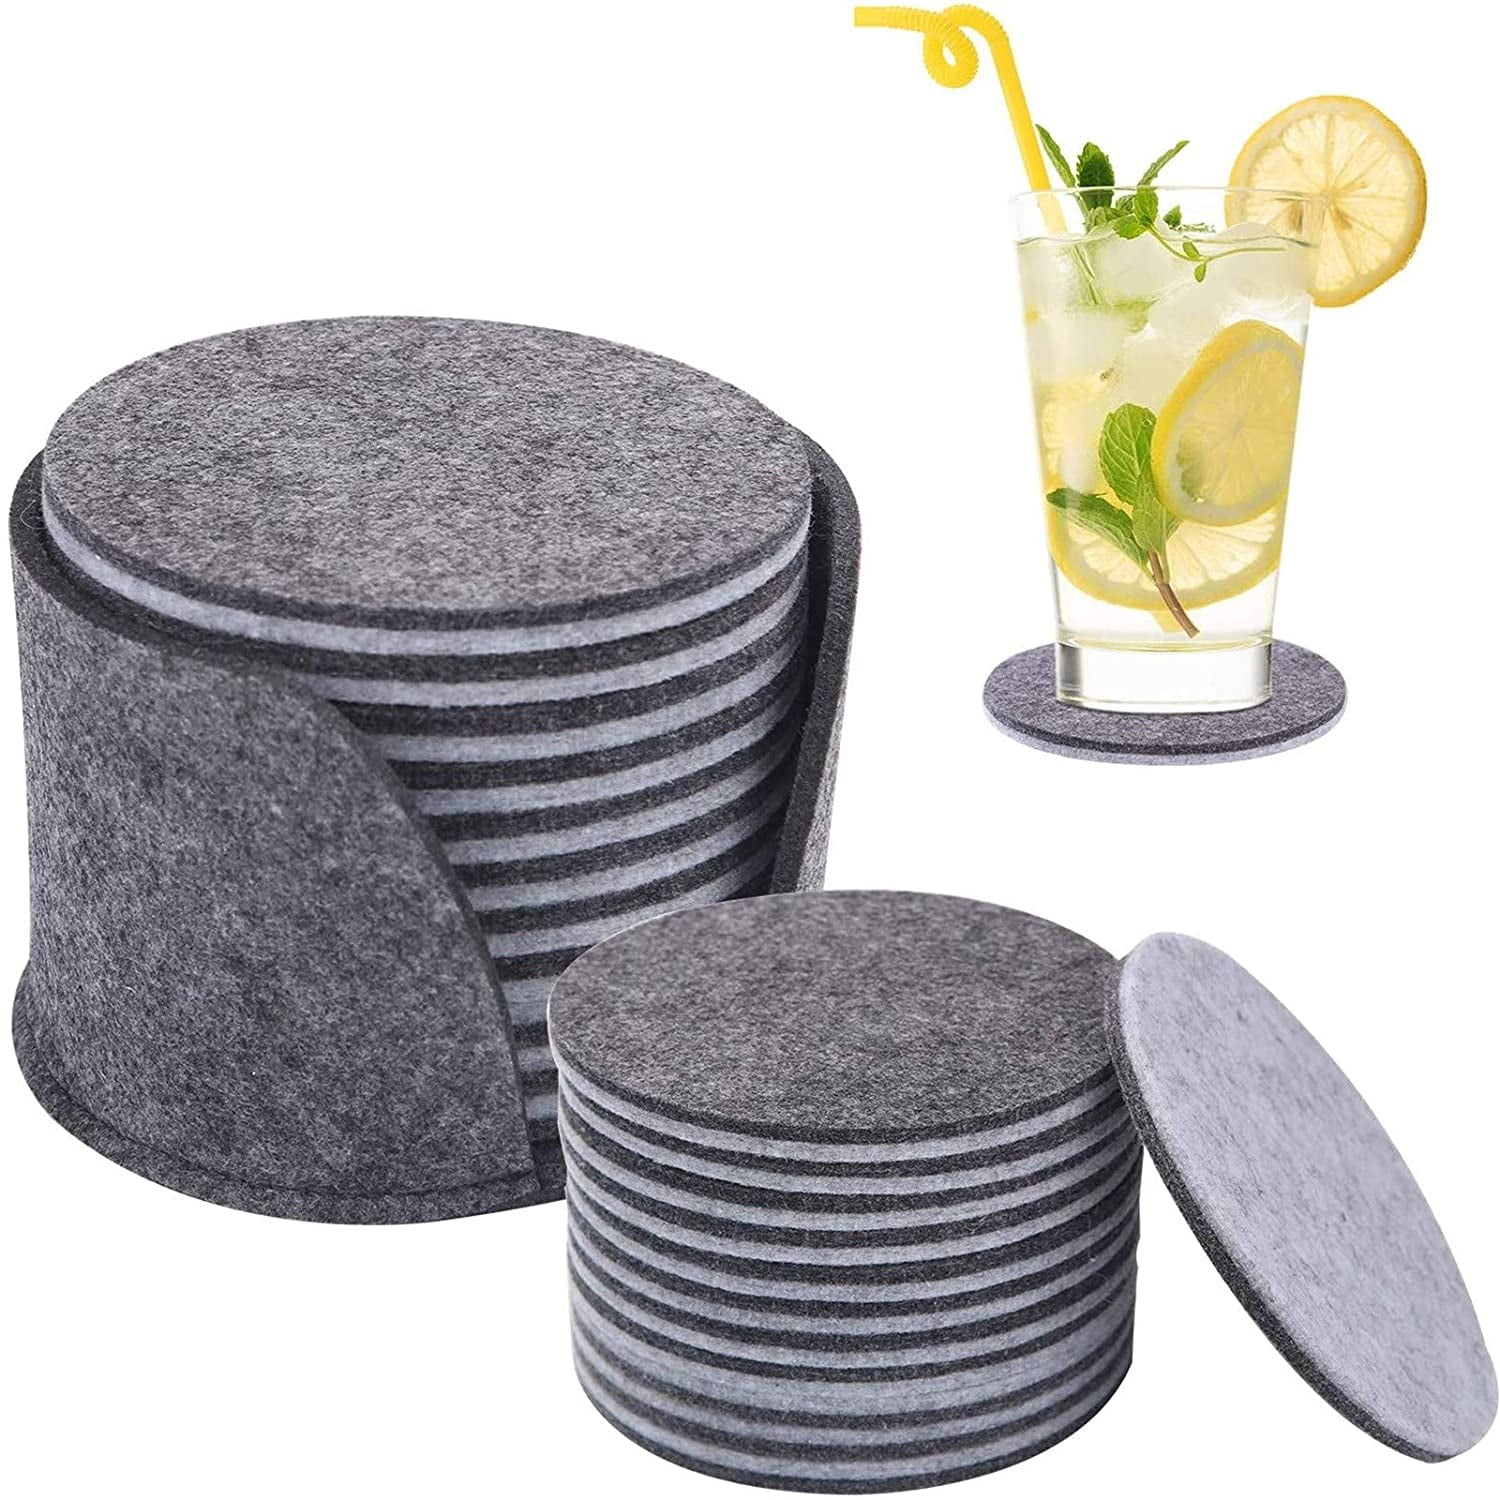 Details about   Absorbent Pad Car Accessories Coaster Car Cup Mat Drink Coaster Non-Slip Mat 